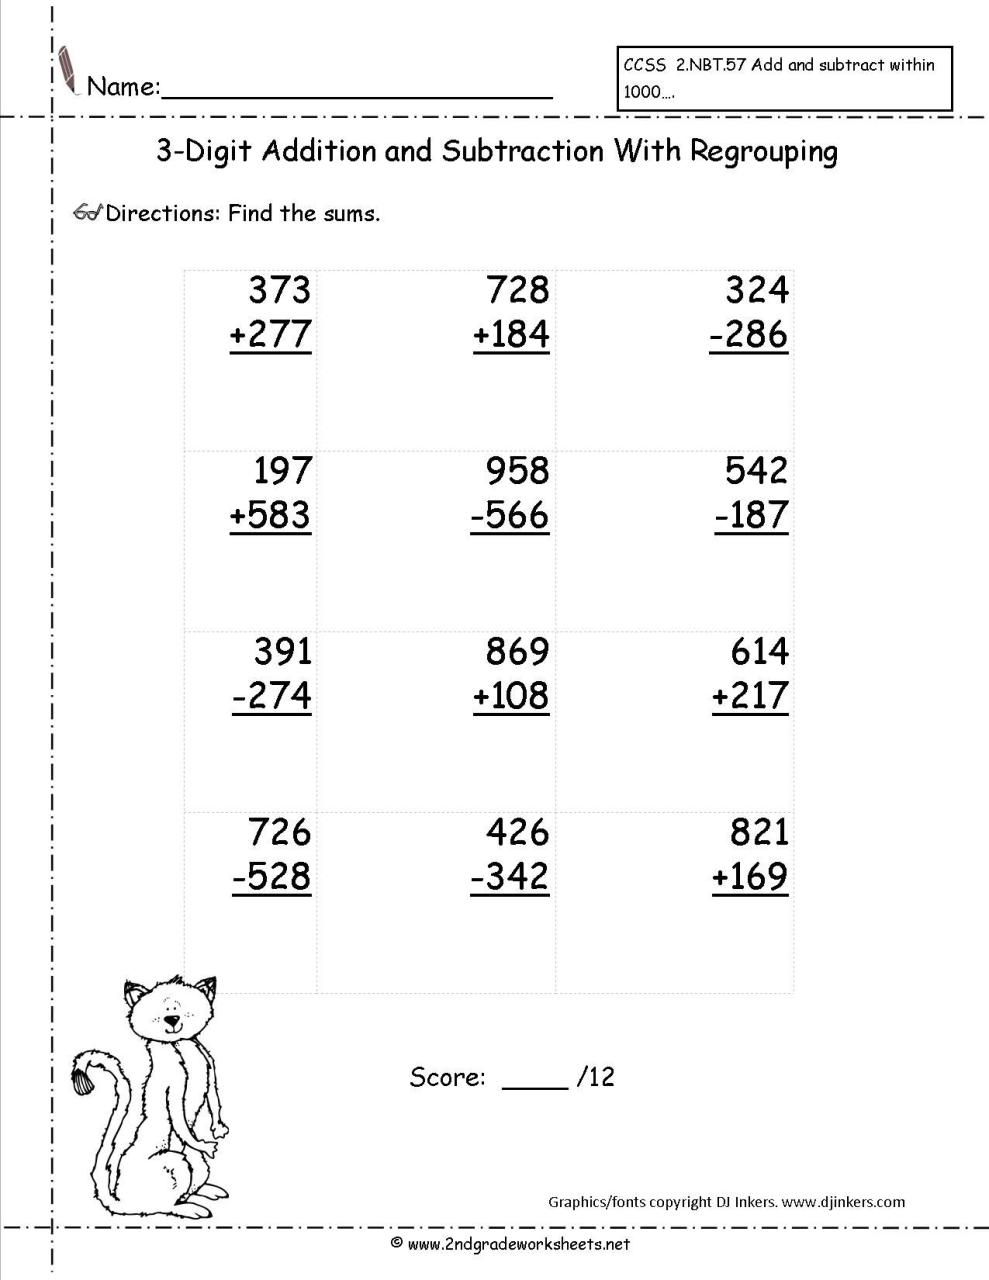 Addition With Regrouping Worksheets For Grade 3